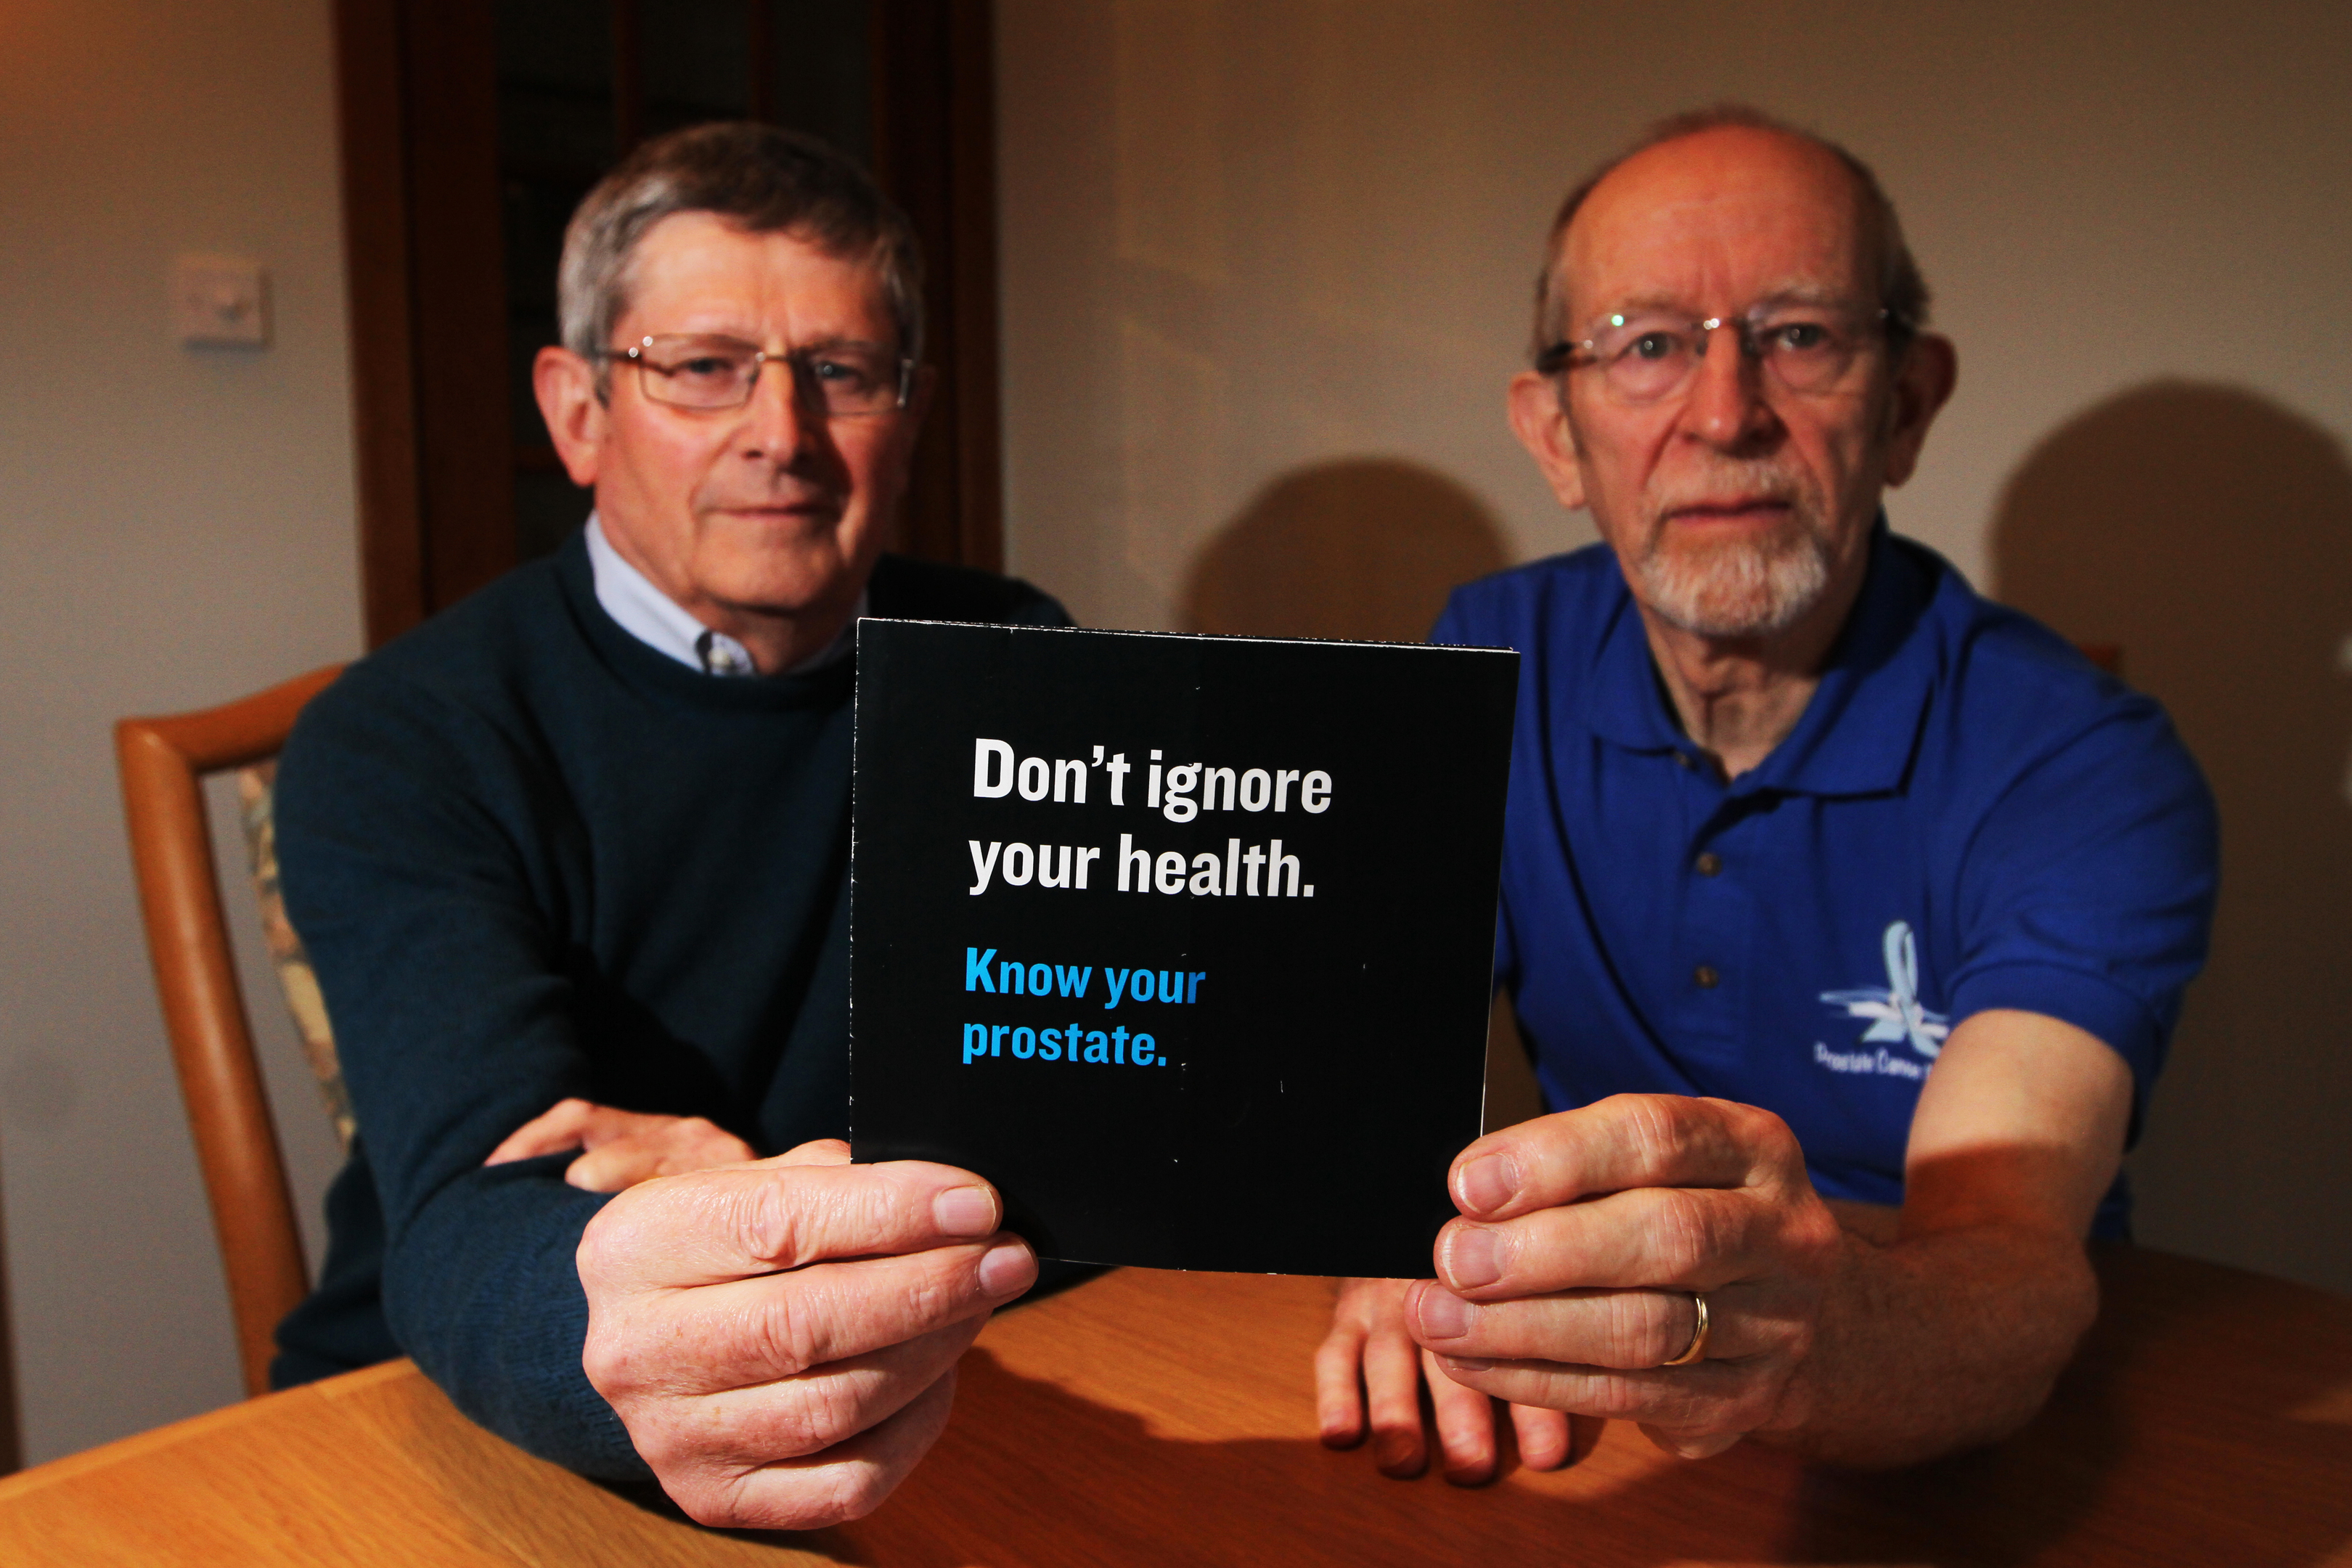 Cupar men Peter Manson, right, and Douglas Provan have both undergone treatment for prostate cancer and are calling for screening to be improved following recent stats that show more men die of prostate cancer than women do of breast cancer.